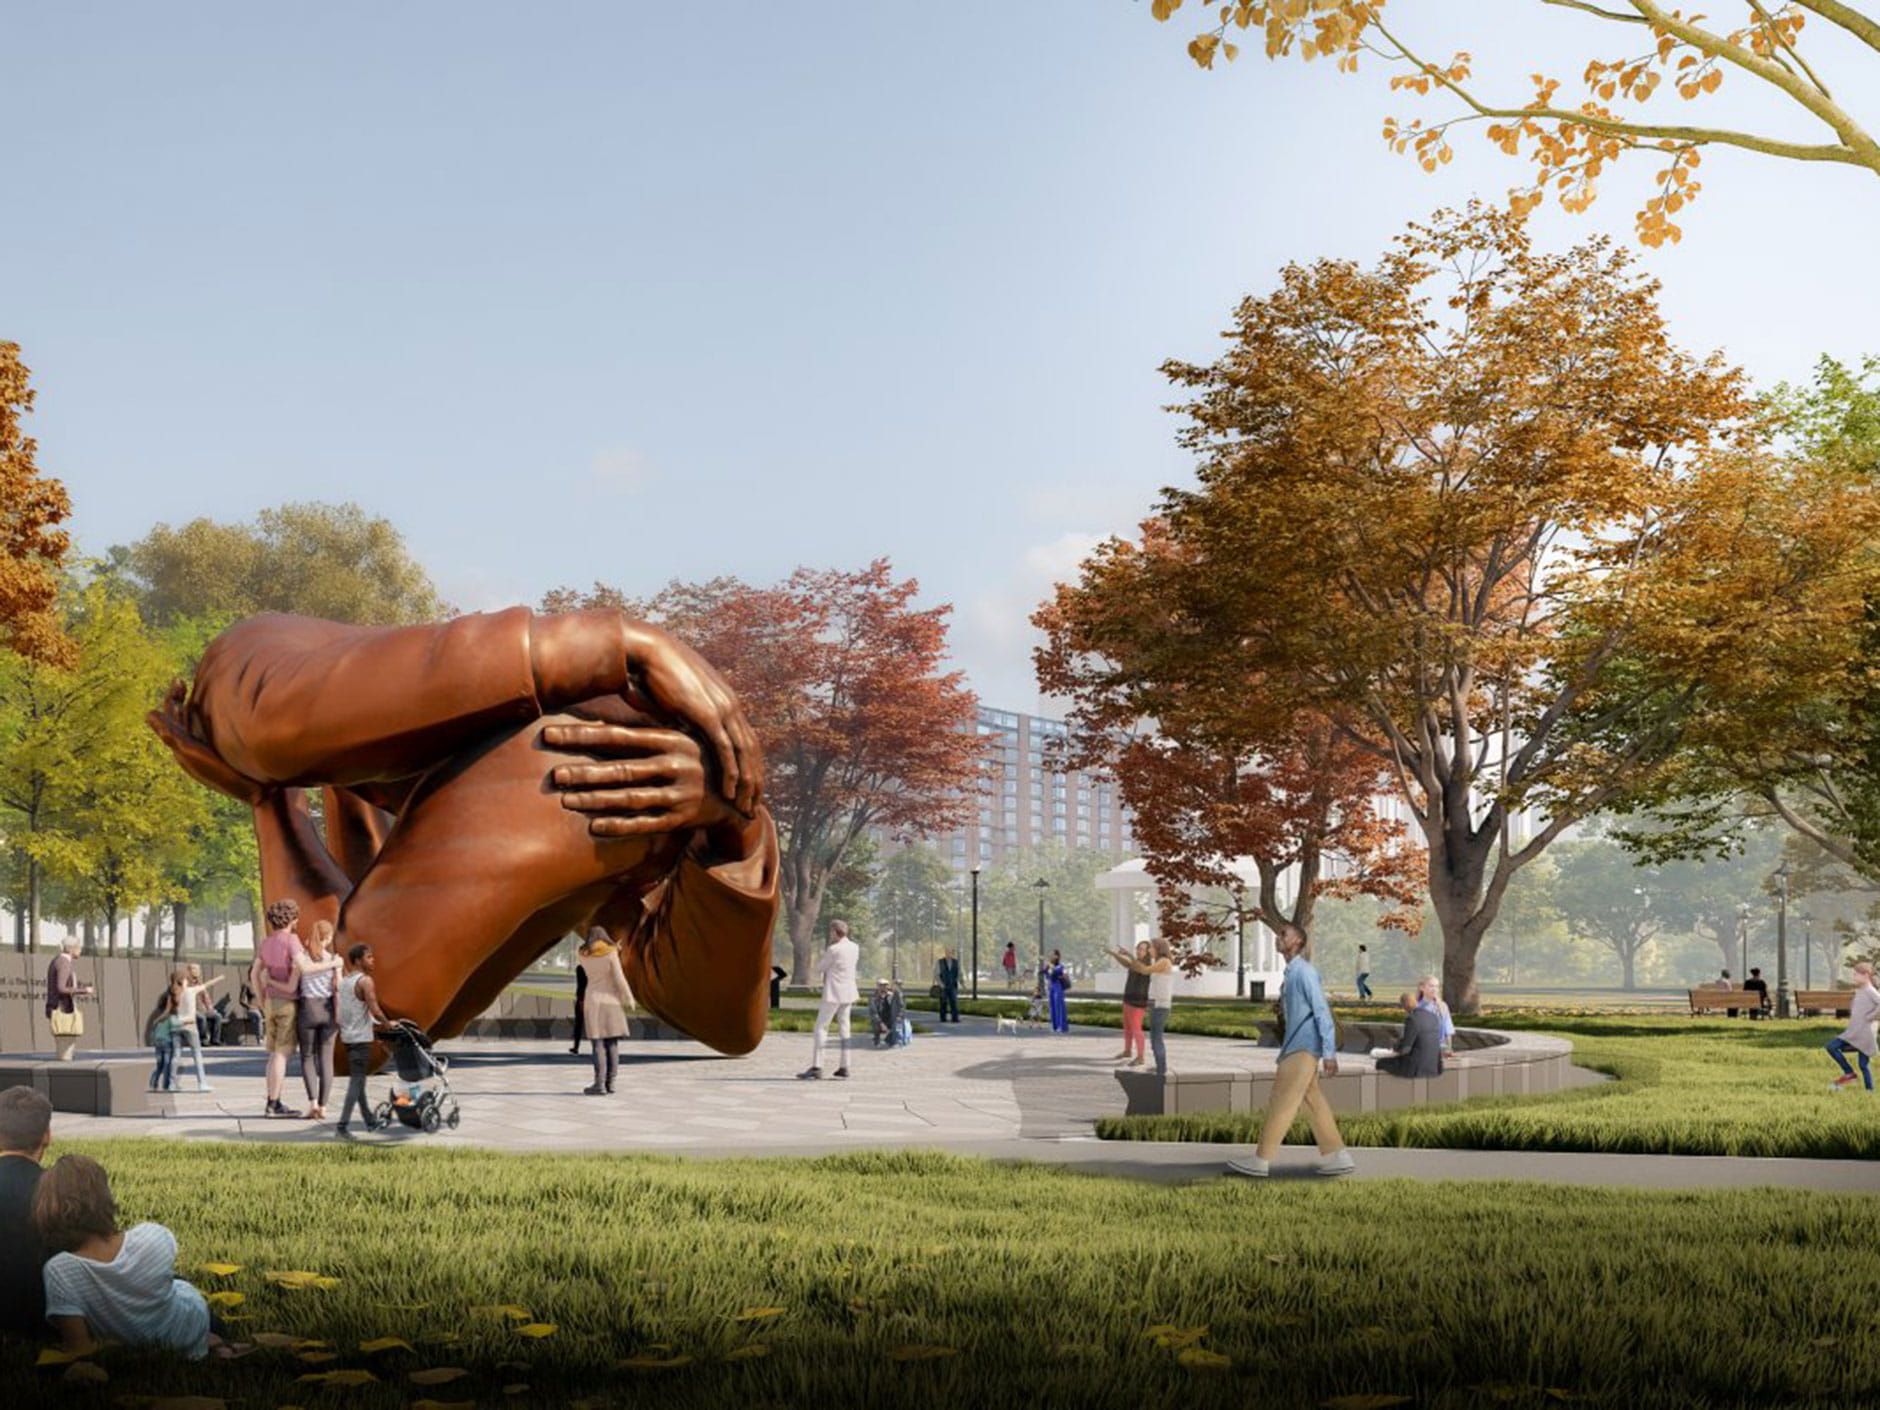 Designed by internationally acclaimed artist Hank Willis Thomas, The Embrace is a massive bronze sculpture (20 feet high and 40 feet wide) built by more than 100 workers inside a workshop at The Foundry in Walla Walla, Wash. It is the first new memorial on Boston Common in 30 years. 